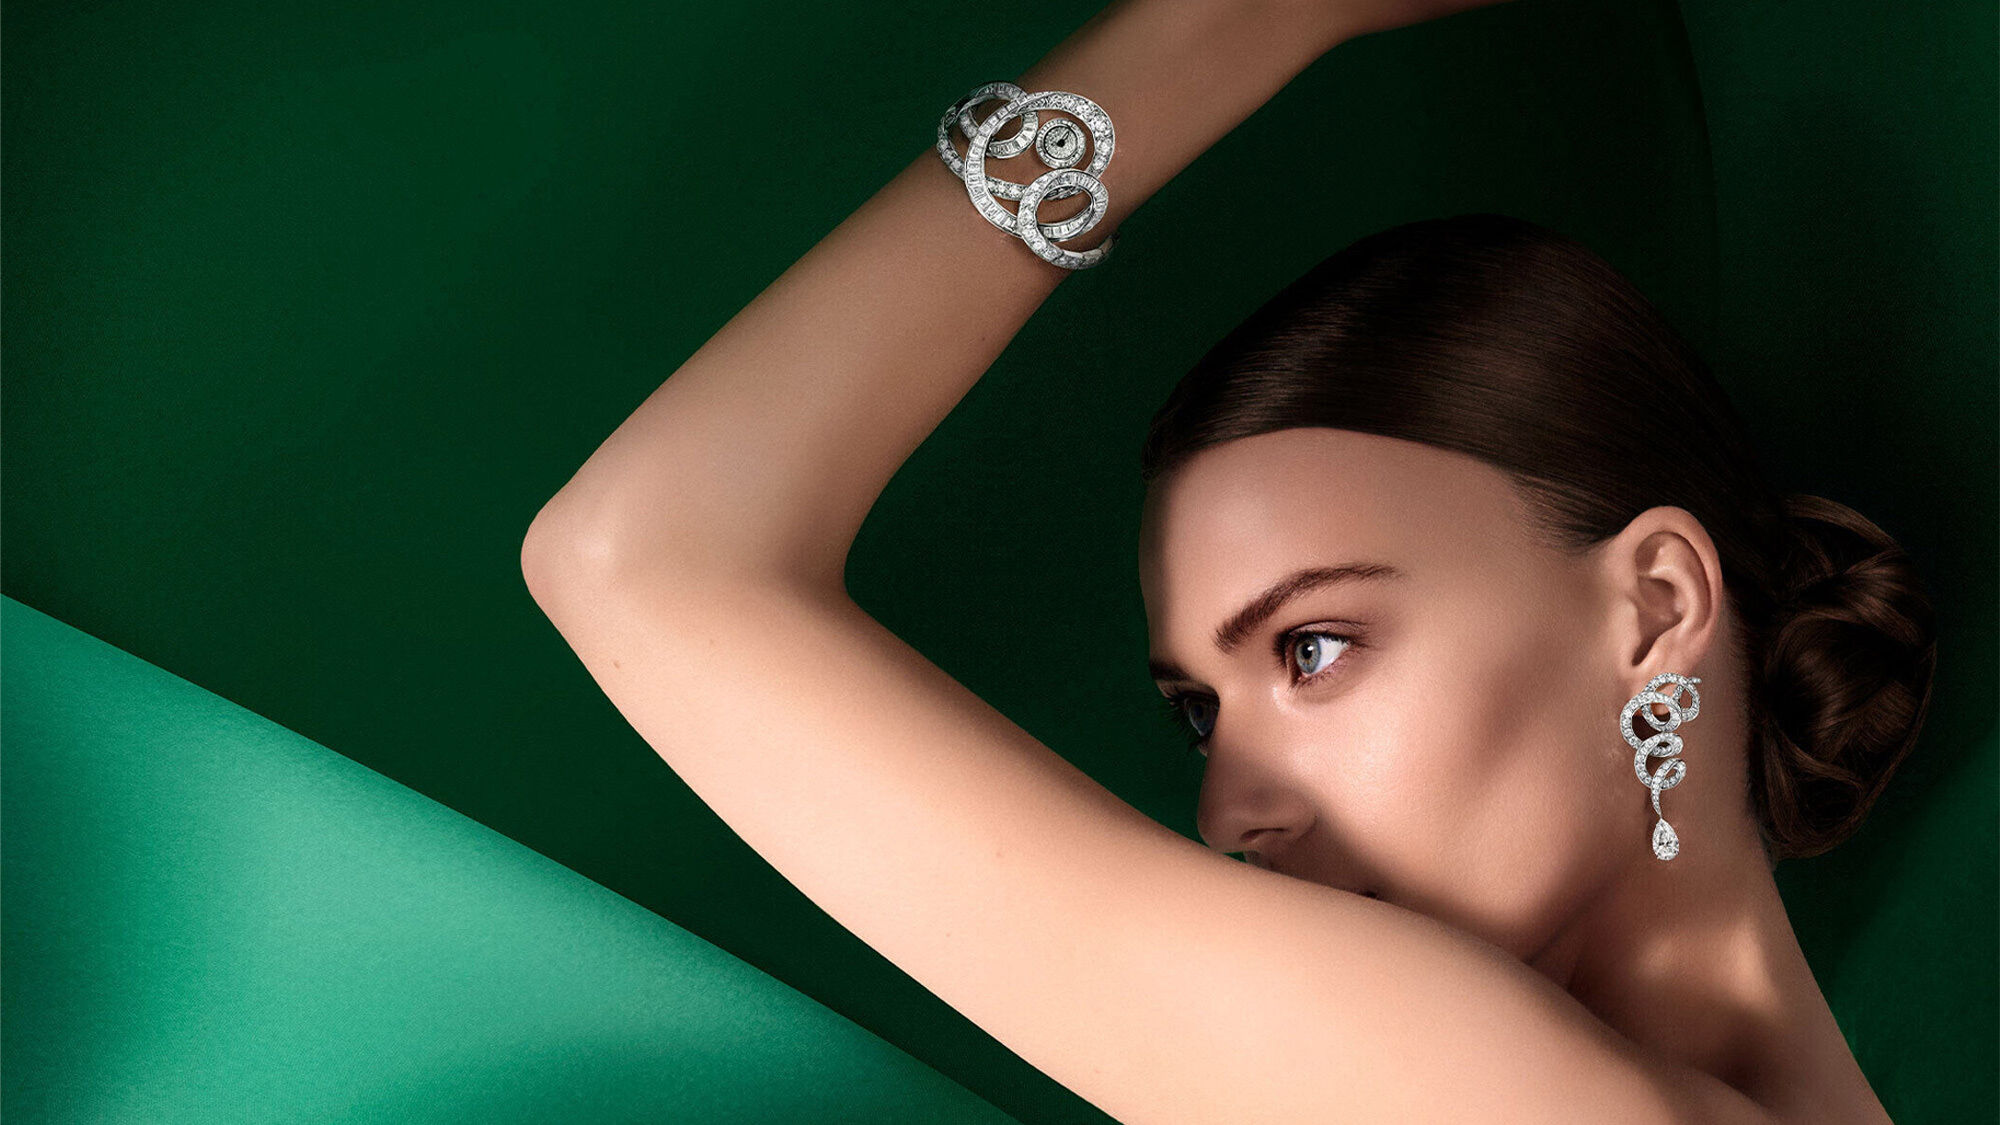 Model wears Inspired by Twombly watch